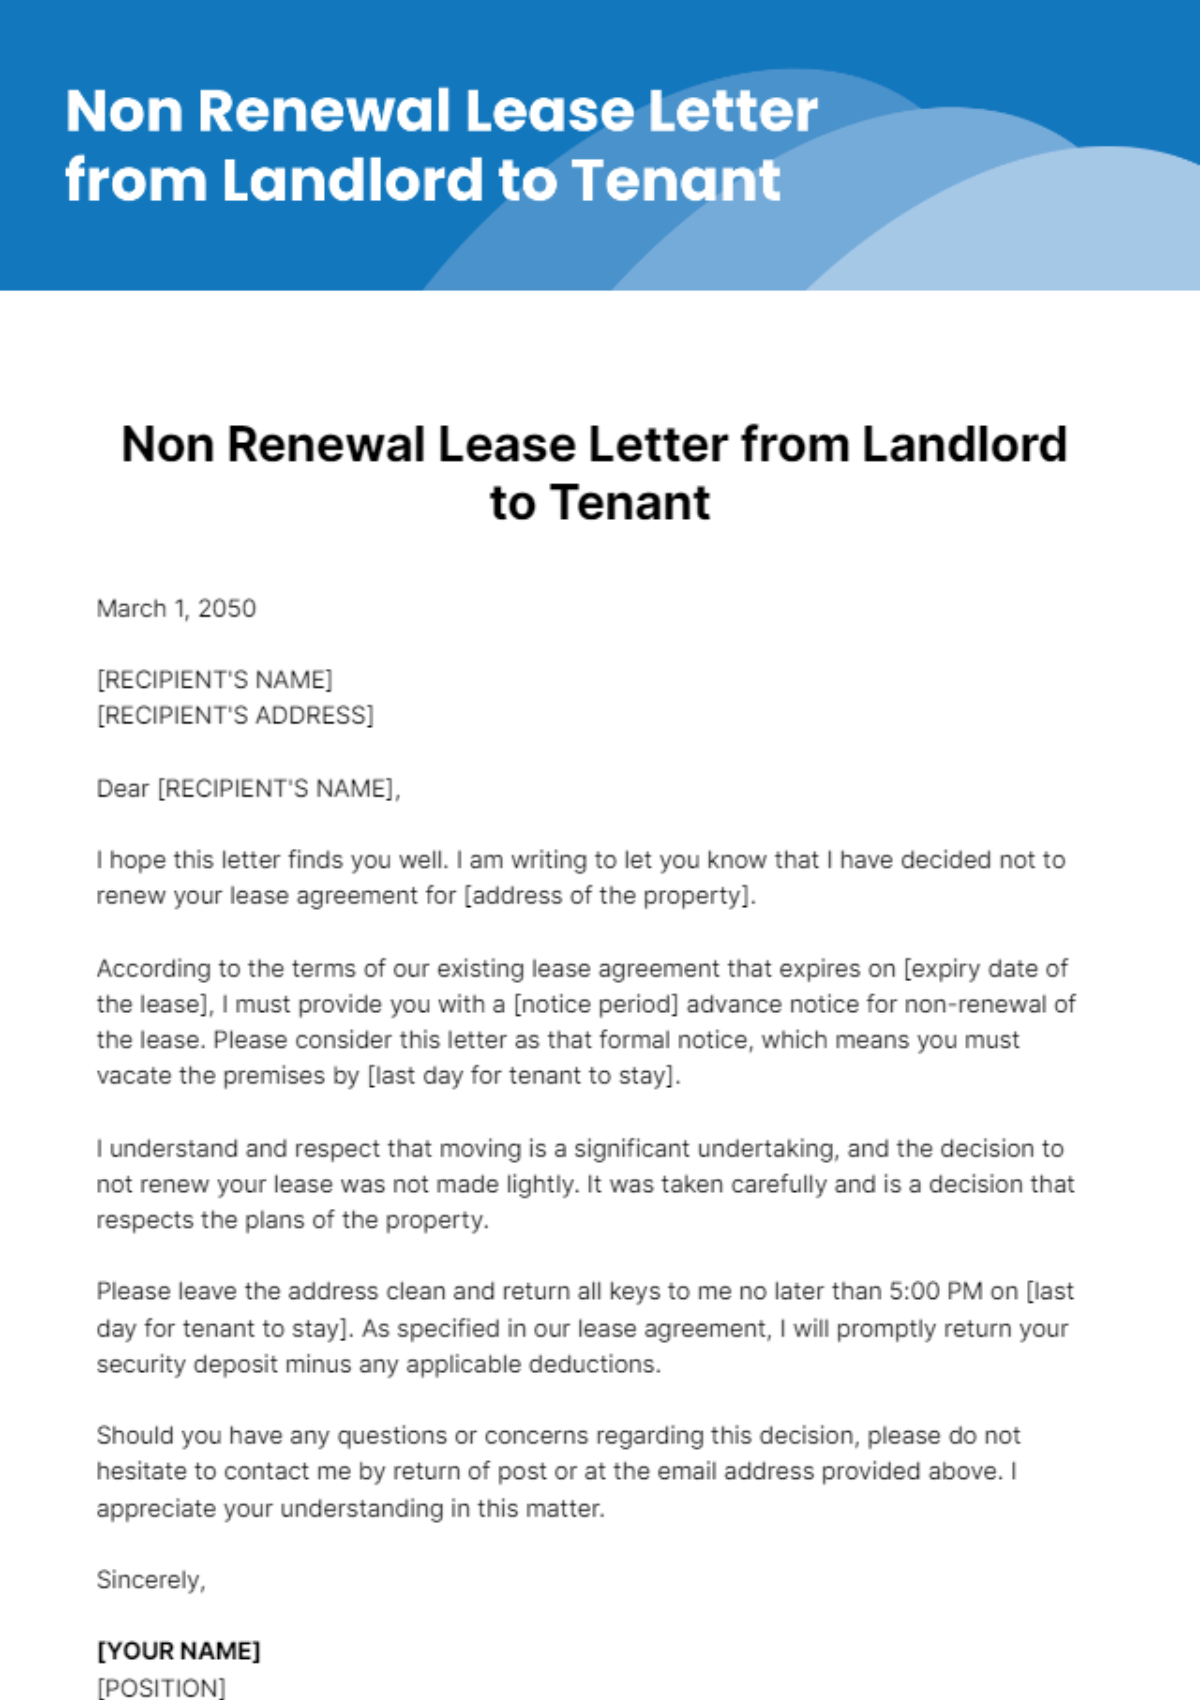 Free Non Renewal Lease Letter from Landlord to Tenant Template